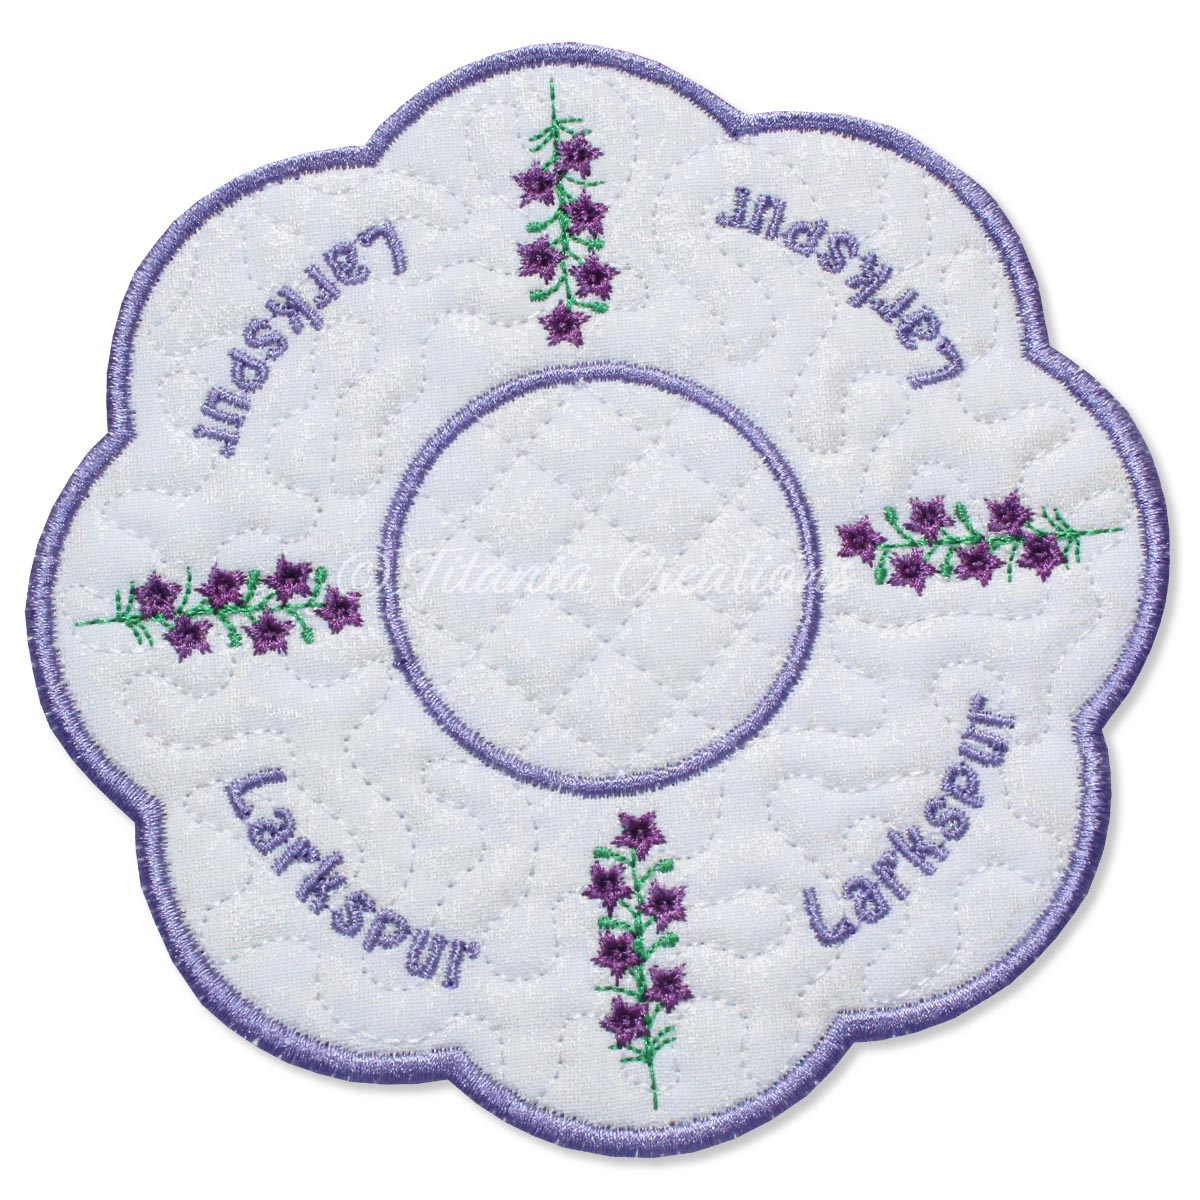 ITH Larkspur Flower for July Candle Mat 5x5 6x6 7x7 8x8